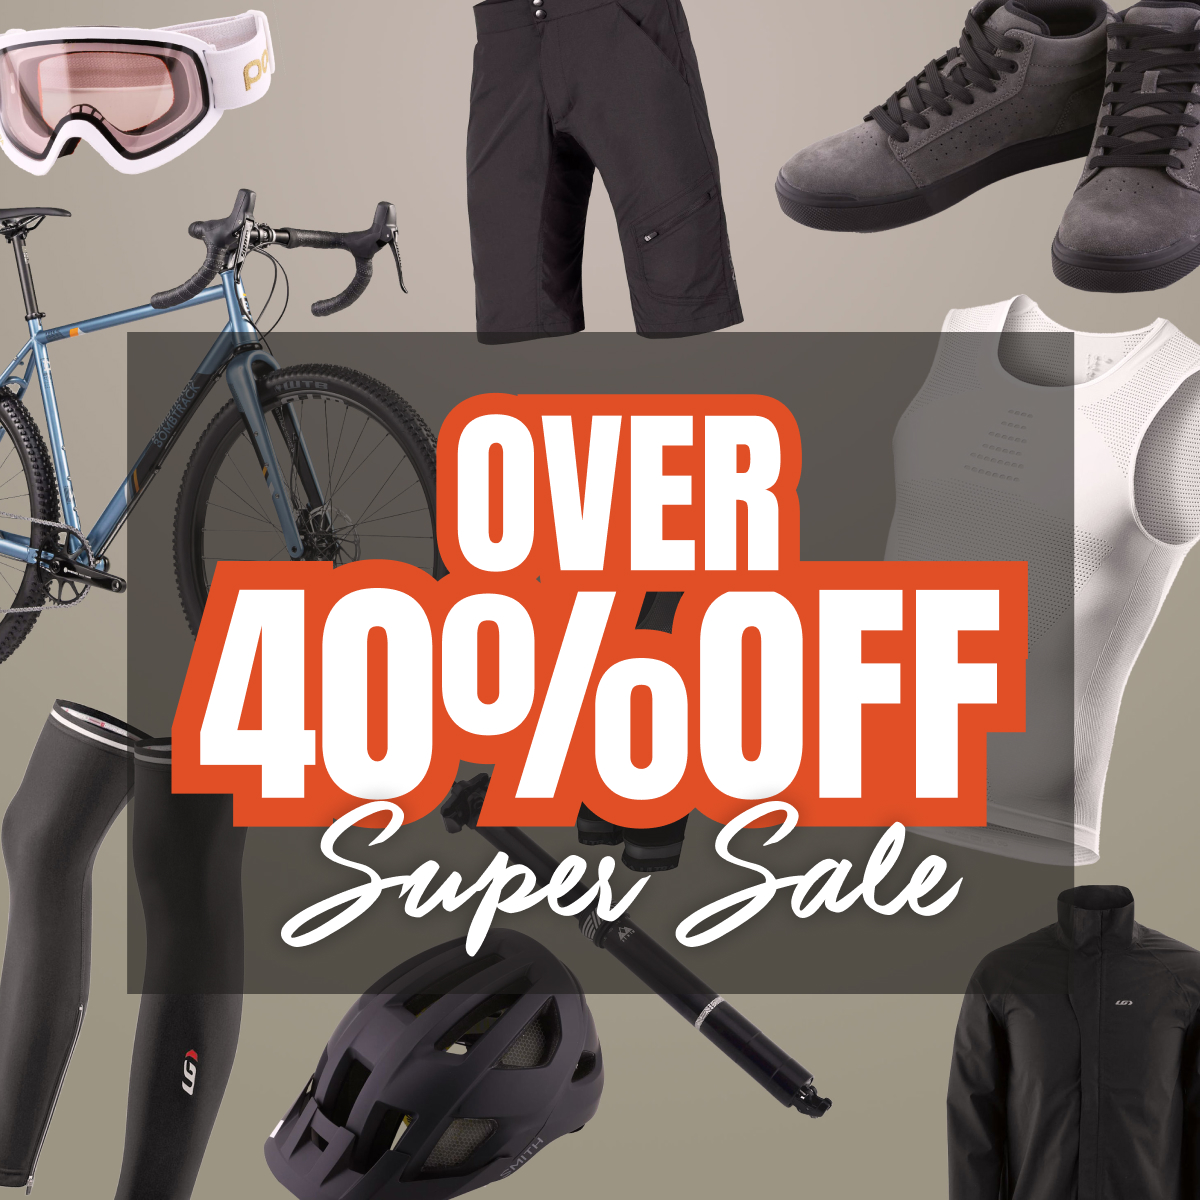 Save more than 40%OFF Super Sale!